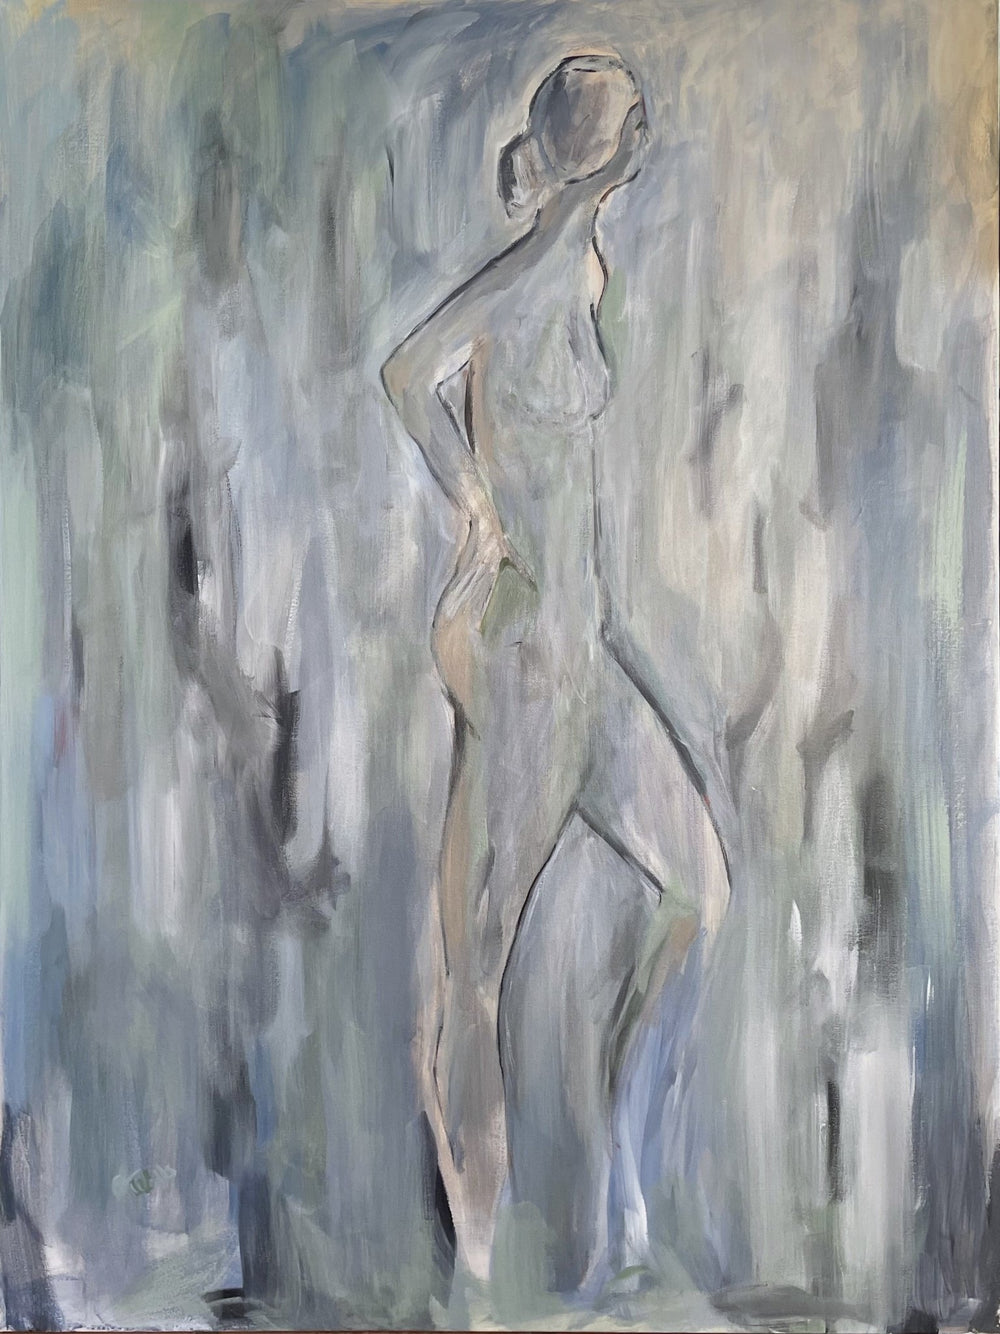 Abstract female figure side view with hand on hips using light blue hues by Geoff Wells titled Blue Light - Artly International